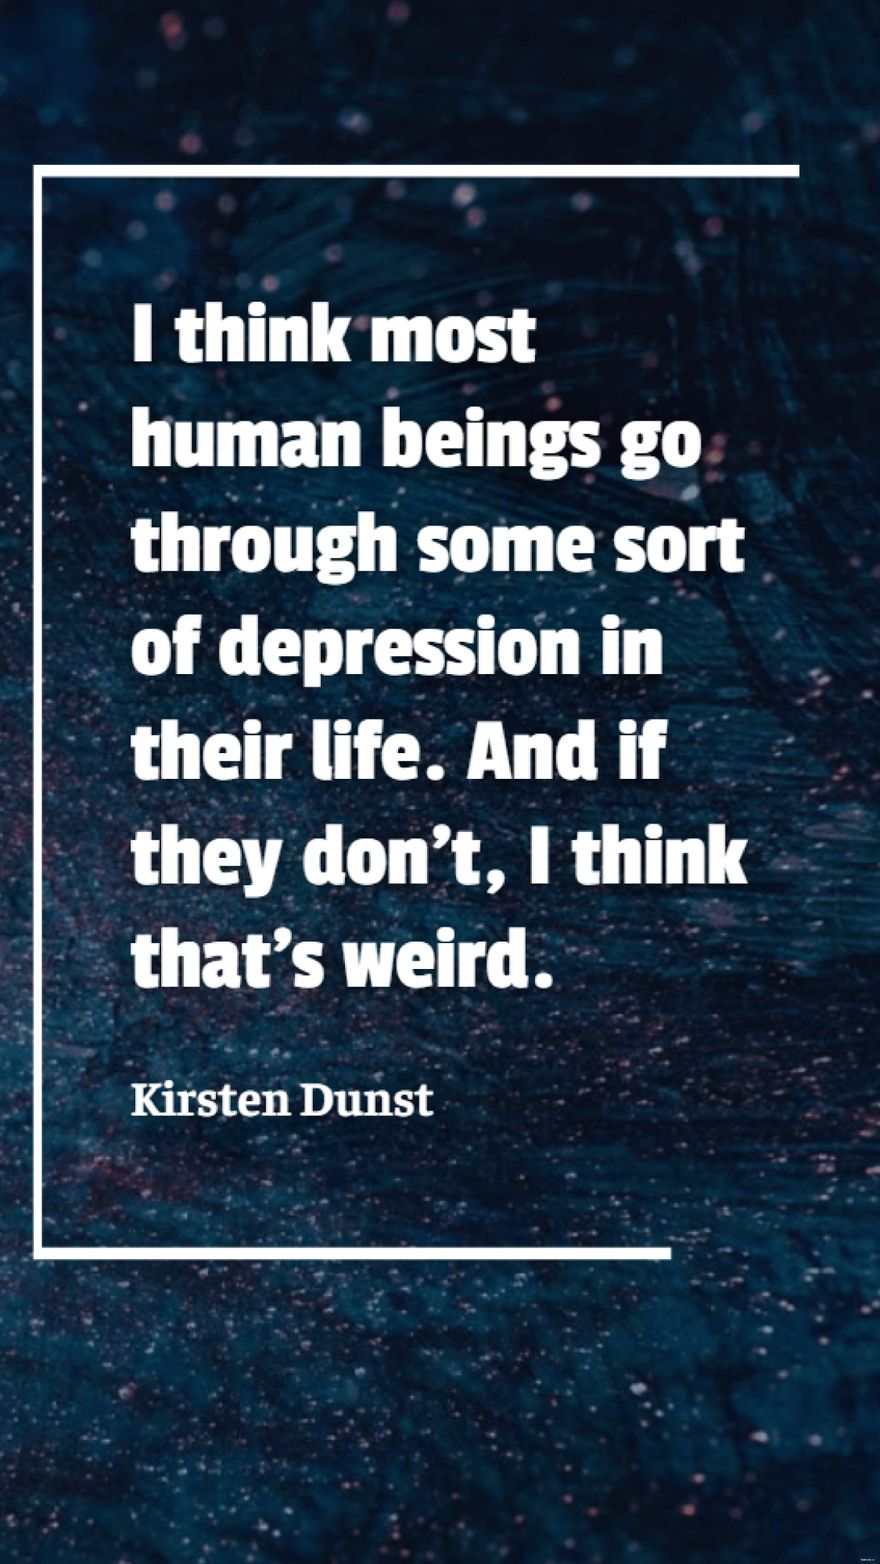 Kirsten Dunst - I think most human beings go through some sort of depression in their life. And if they don't, I think that's weird.